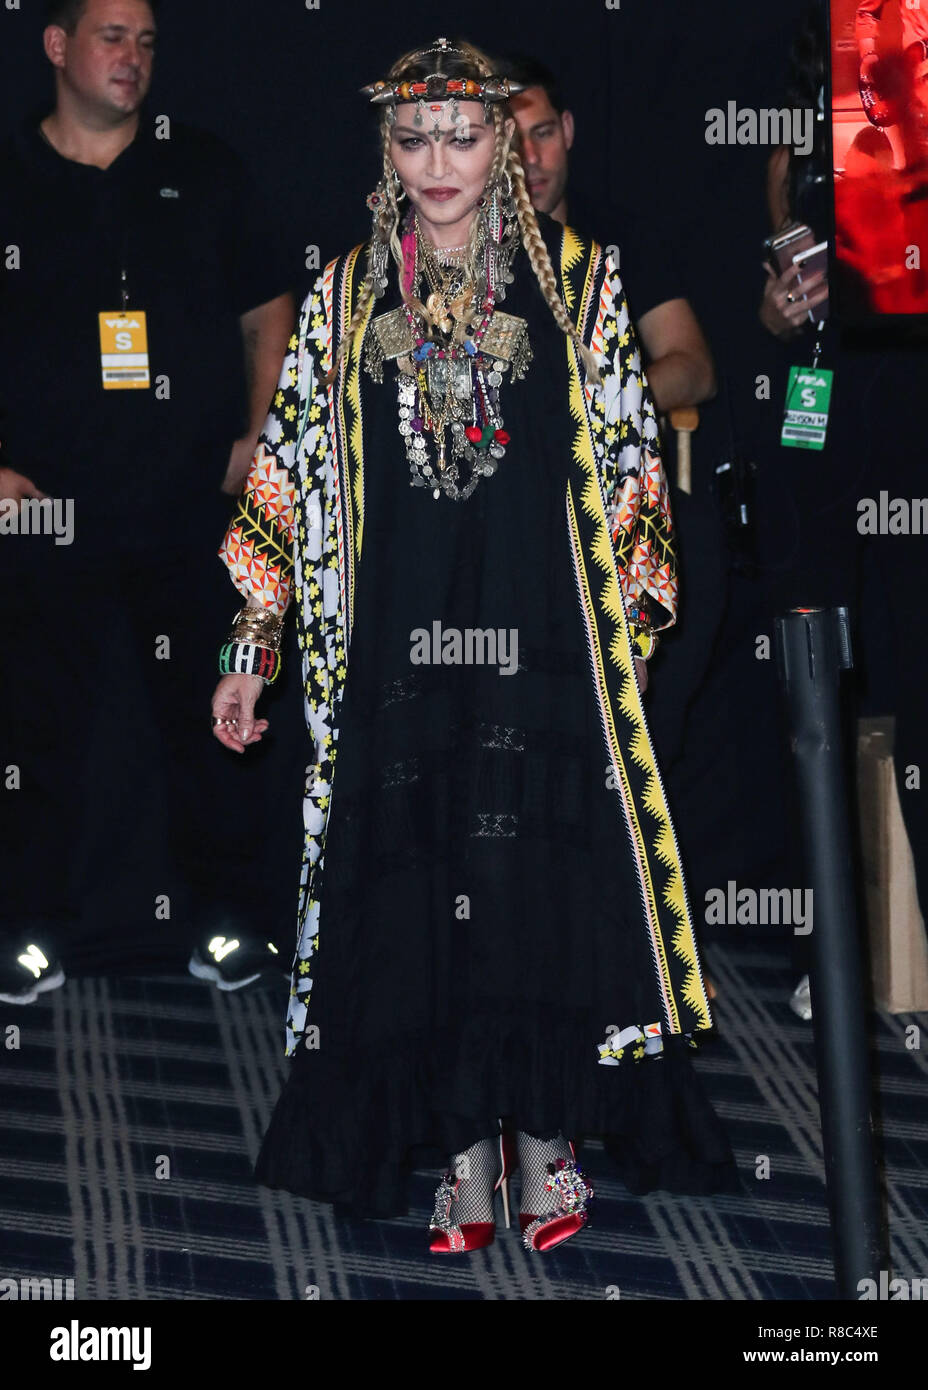 MANHATTAN, NEW YORK CITY, NY, USA - AUGUST 20: Singer Madonna poses backstage during the 2018 MTV Video Music Awards held at the Radio City Music Hall on August 20, 2018 in Manhattan, New York City, New York, United States. (Photo by Xavier Collin/Image Press Agency) Stock Photo